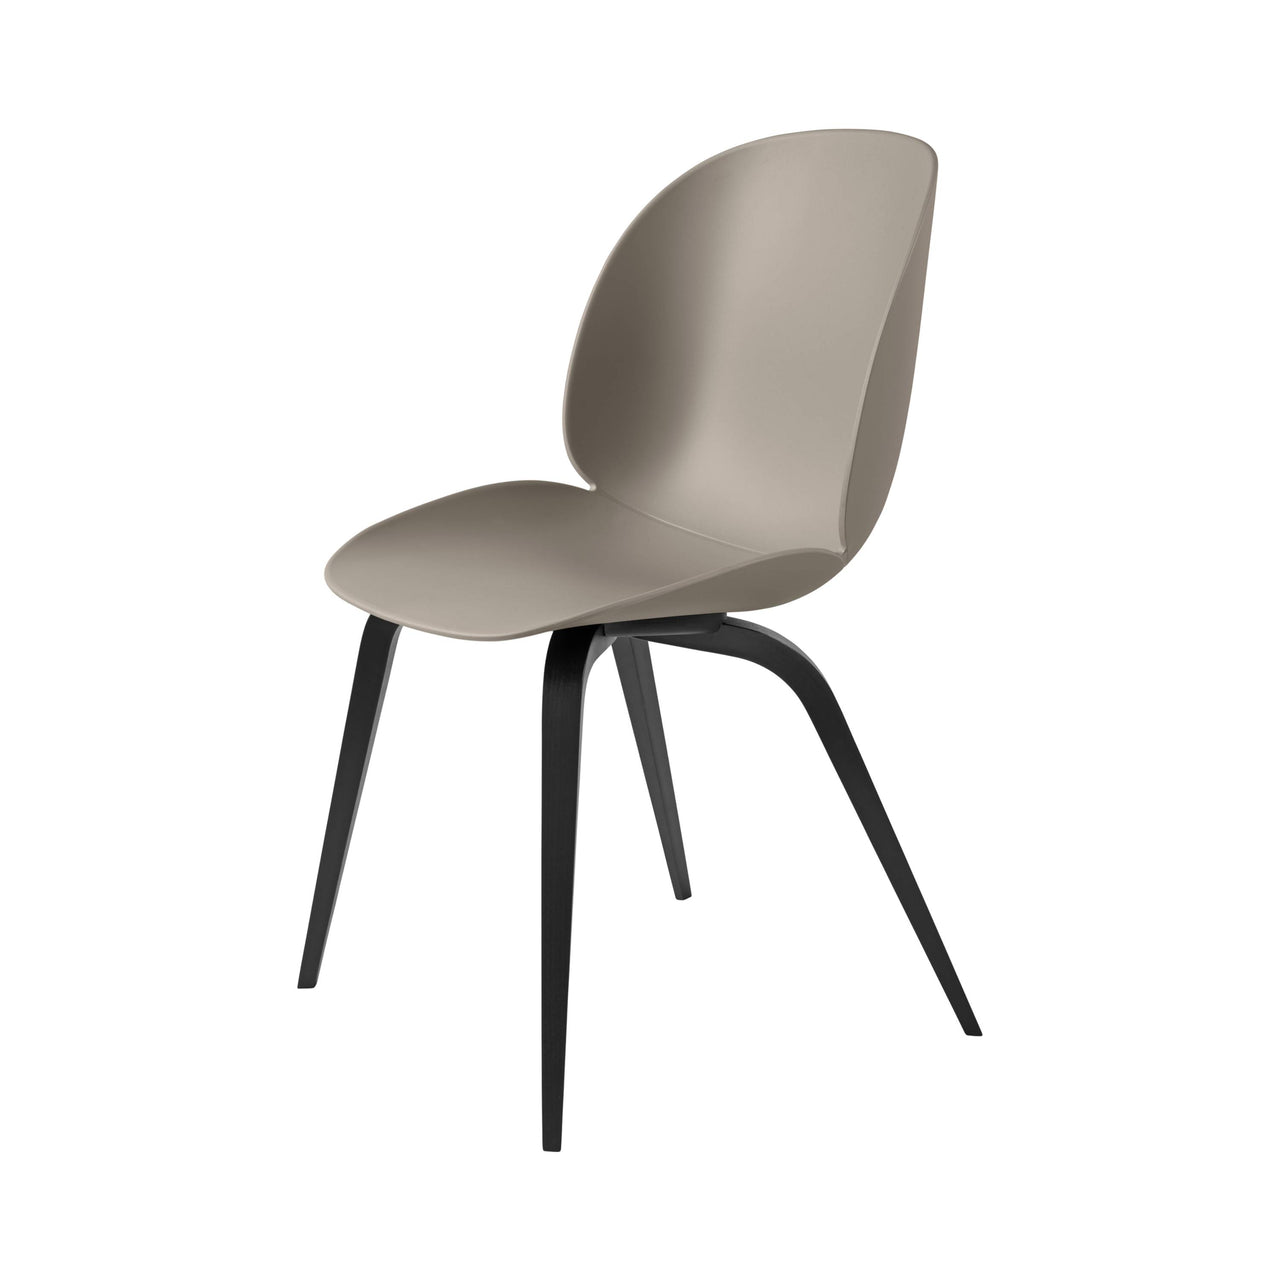 Beetle Dining Chair: Wood Base + New Beige + Black Stained Beech + Plastic Glides